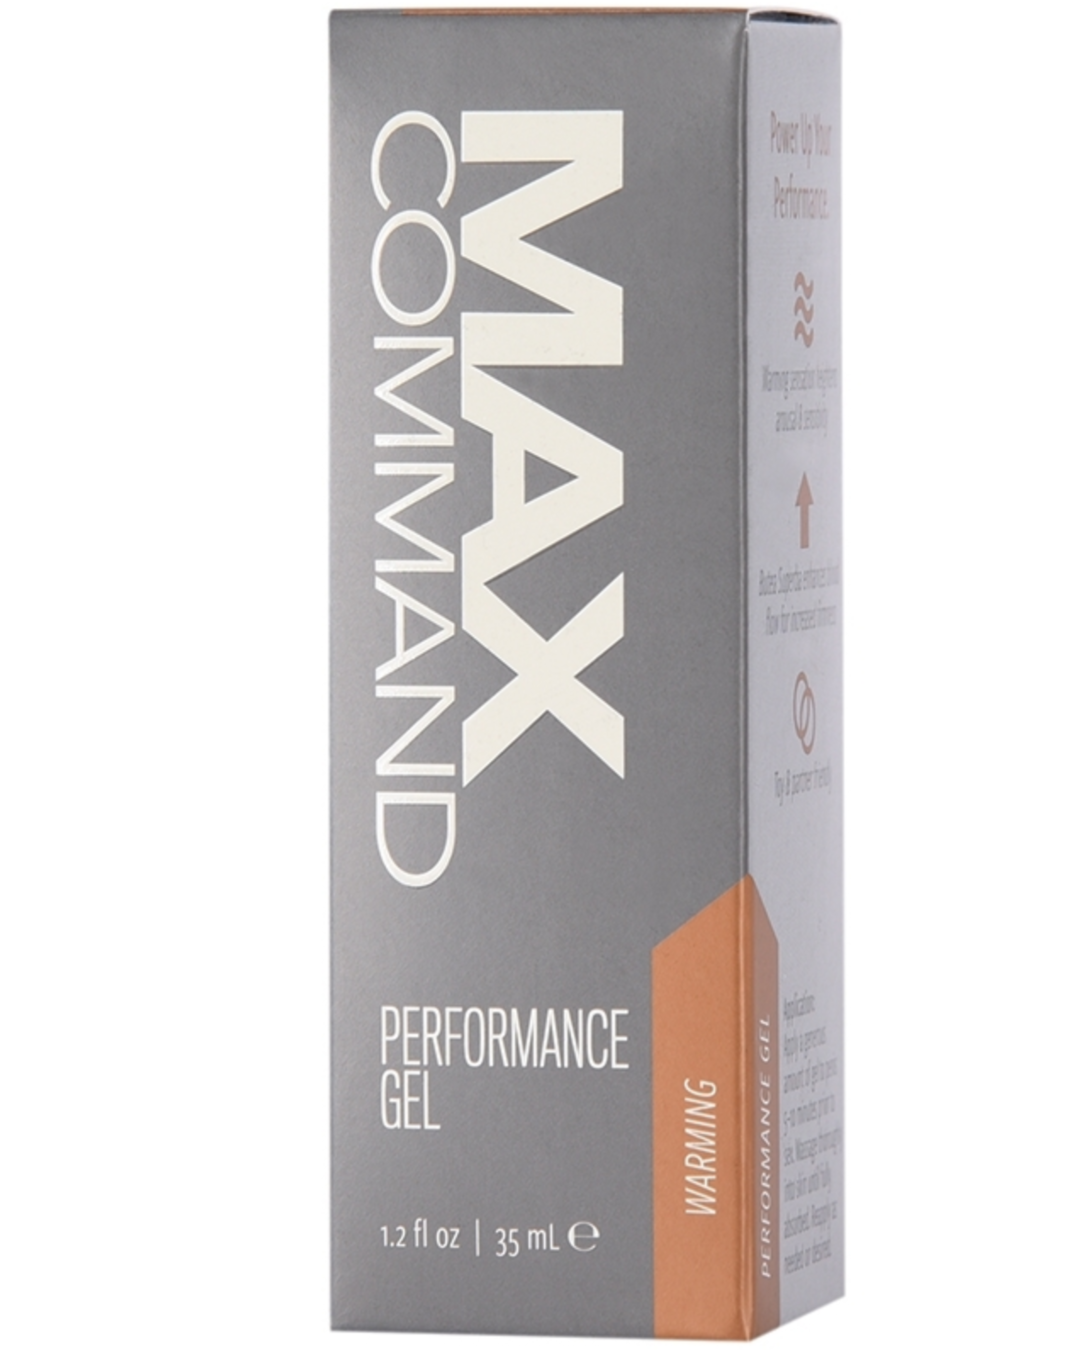 Max Command Performance Gel - Warming 1.2 oz up close of box 